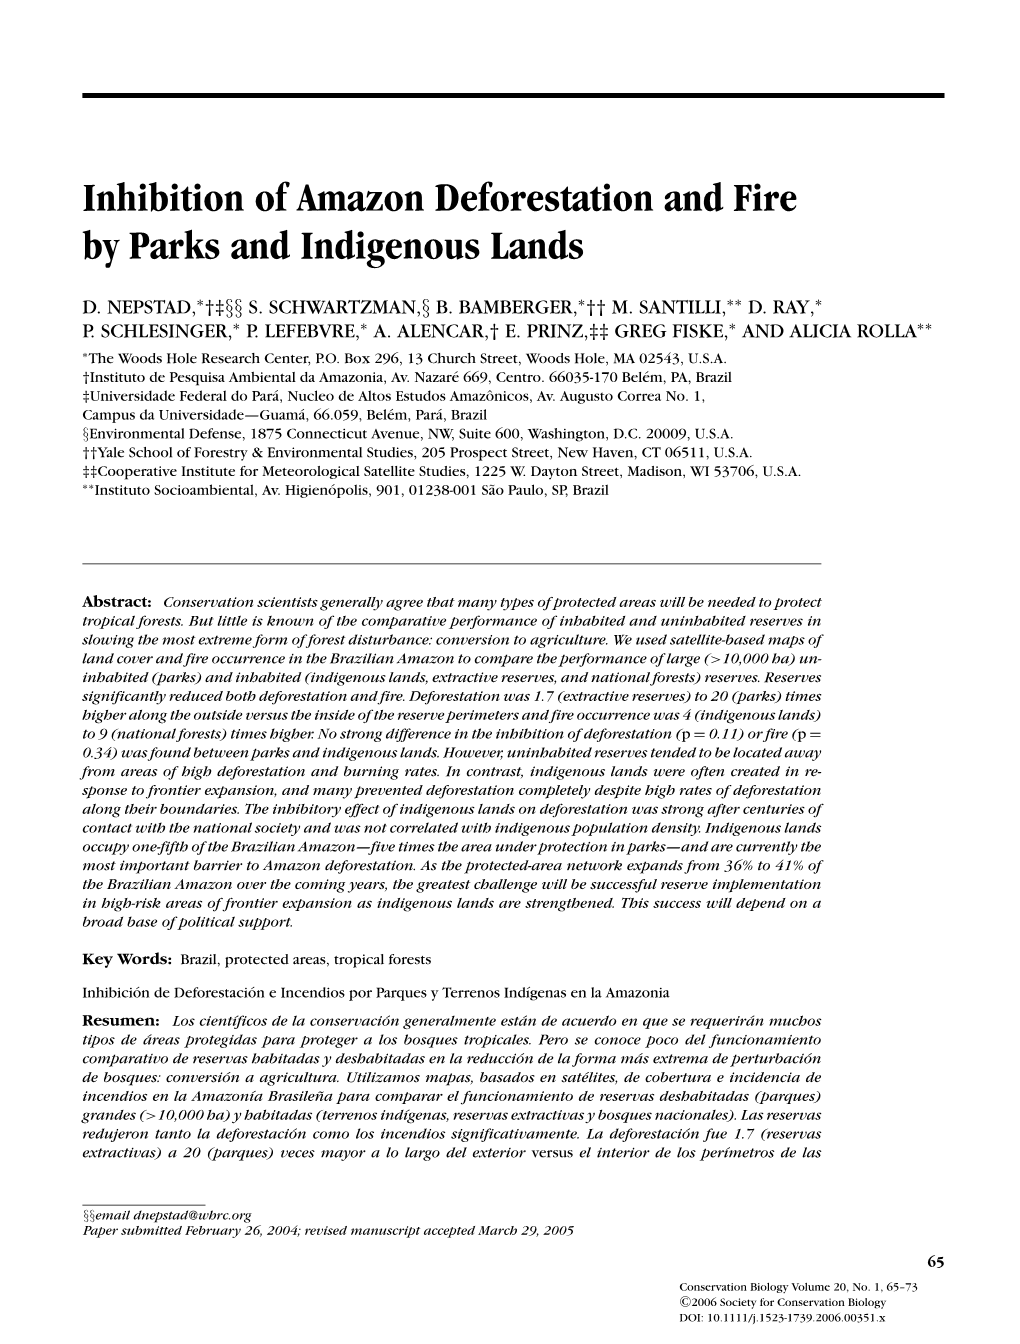 Inhibition of Amazon Deforestation and Fire by Parks and Indigenous Lands